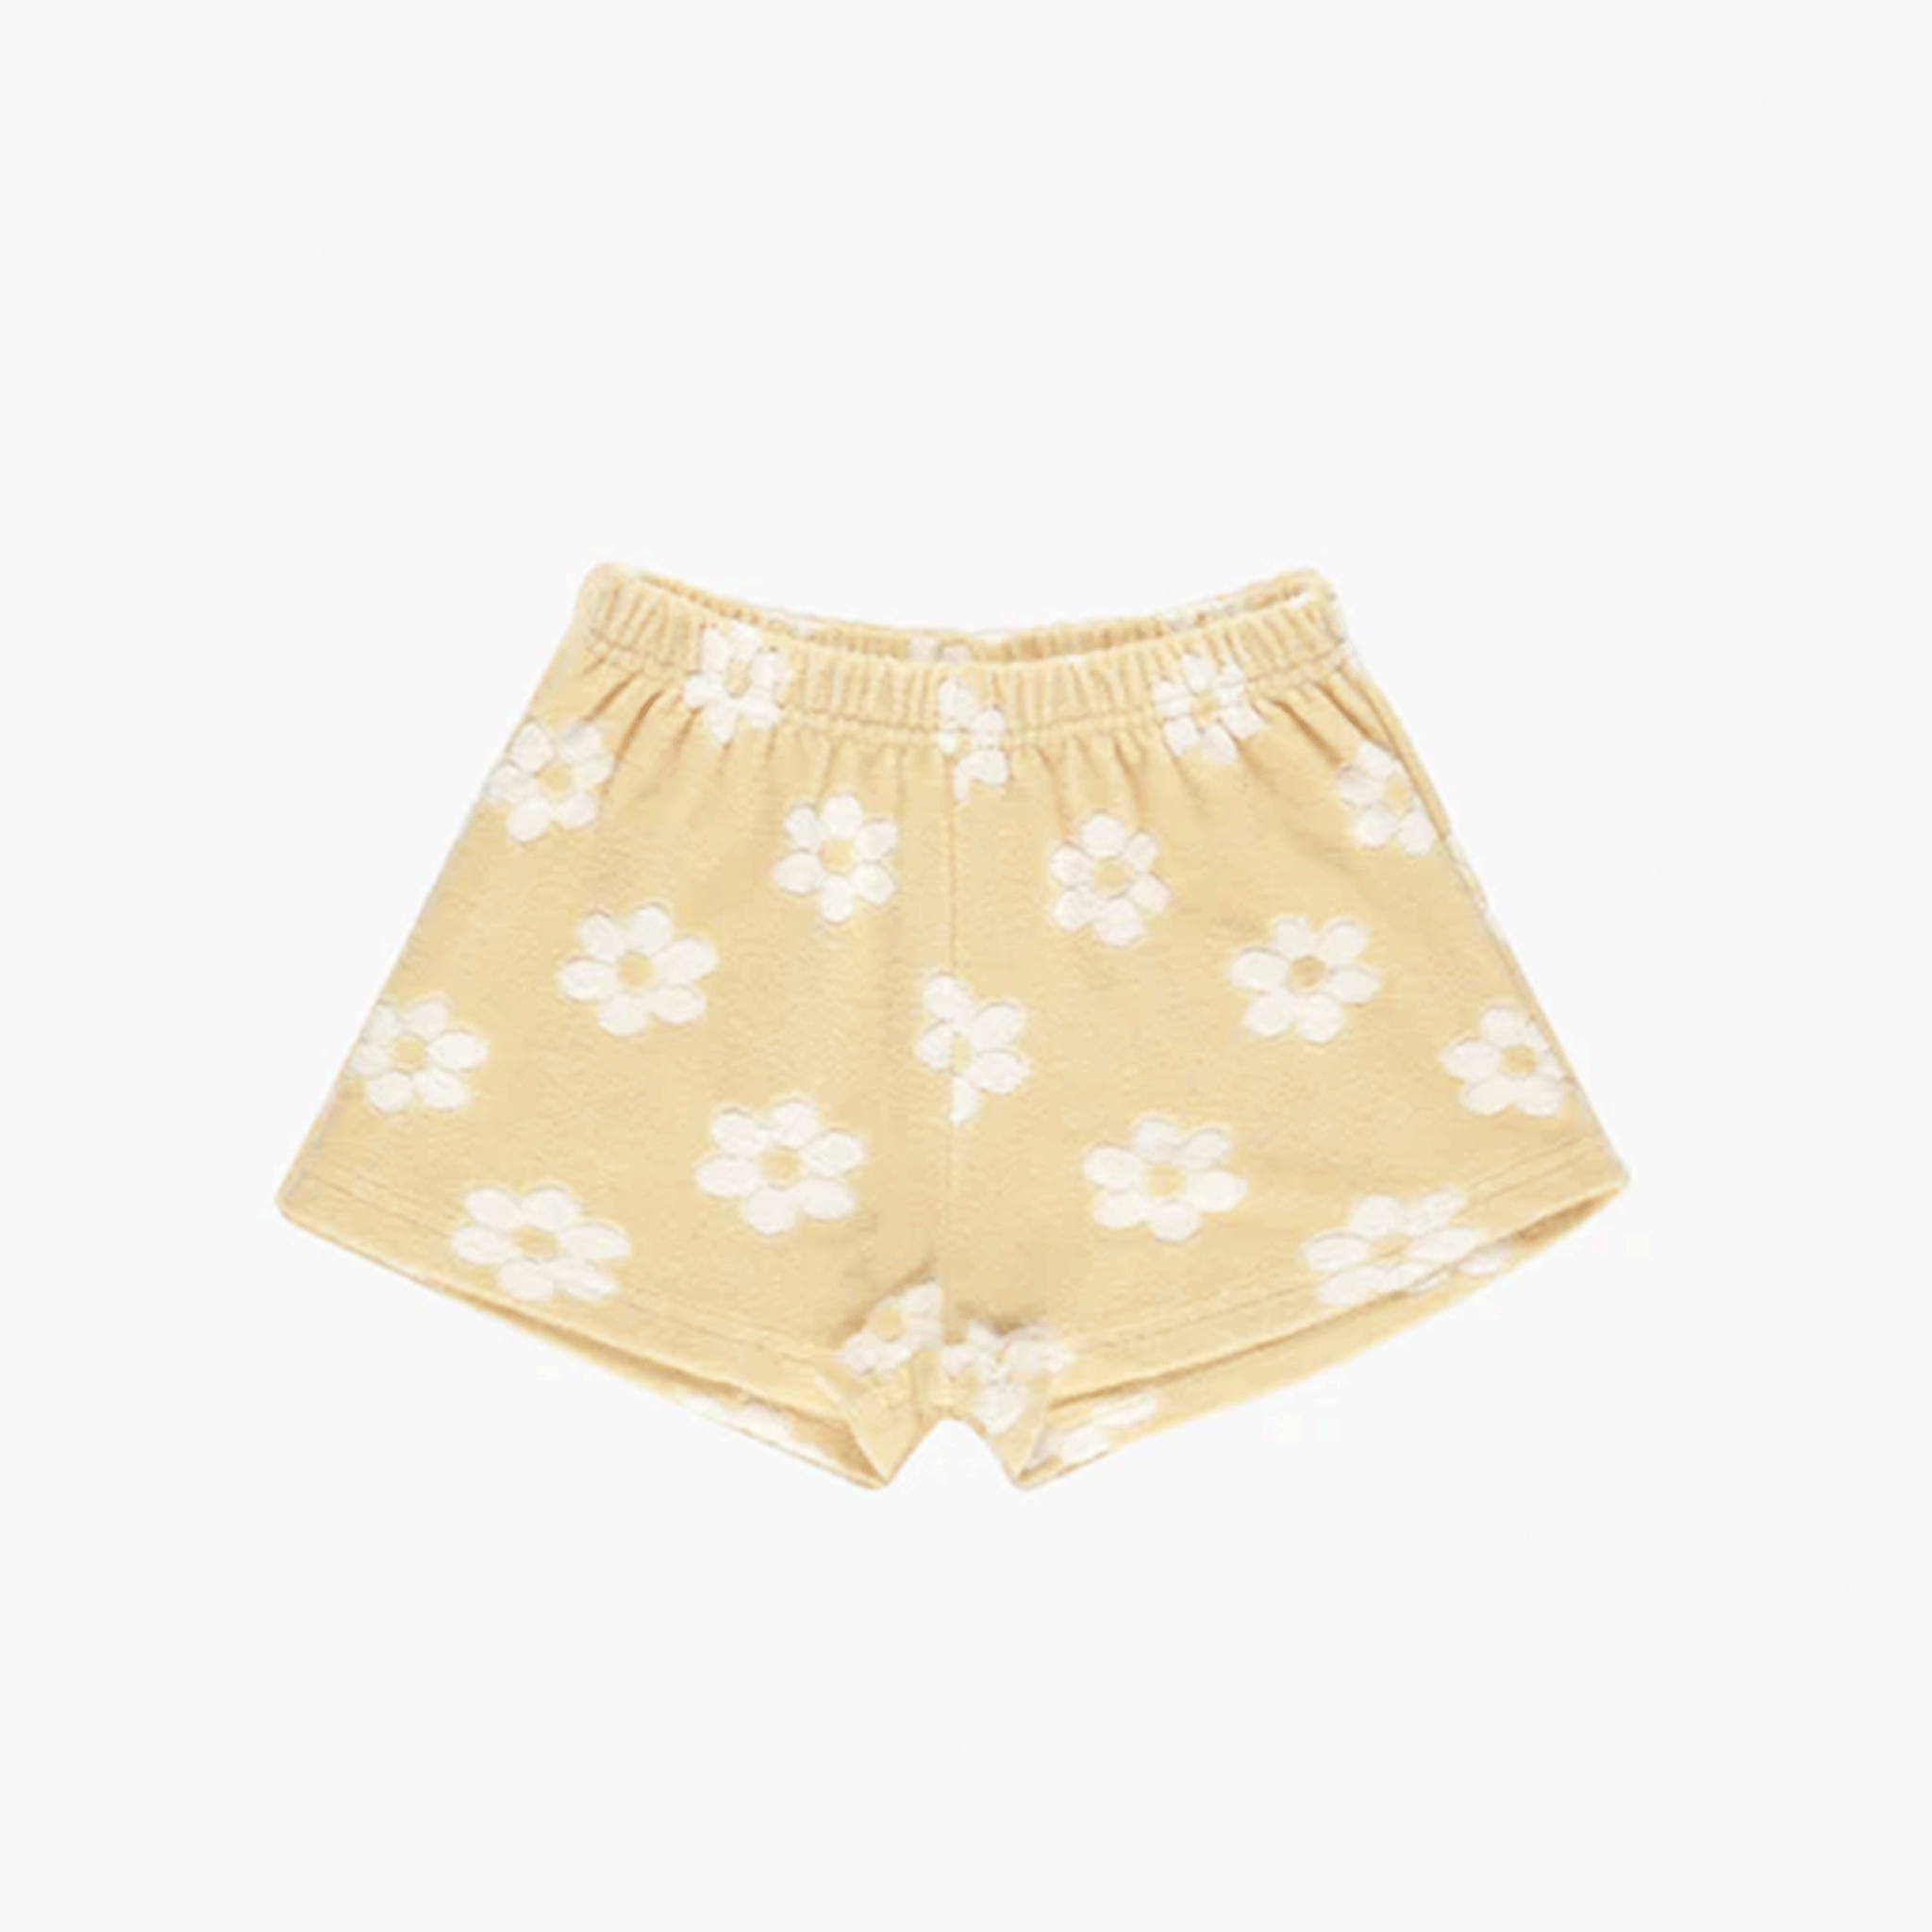 A yellow daisy printed pair of terry track shorts.